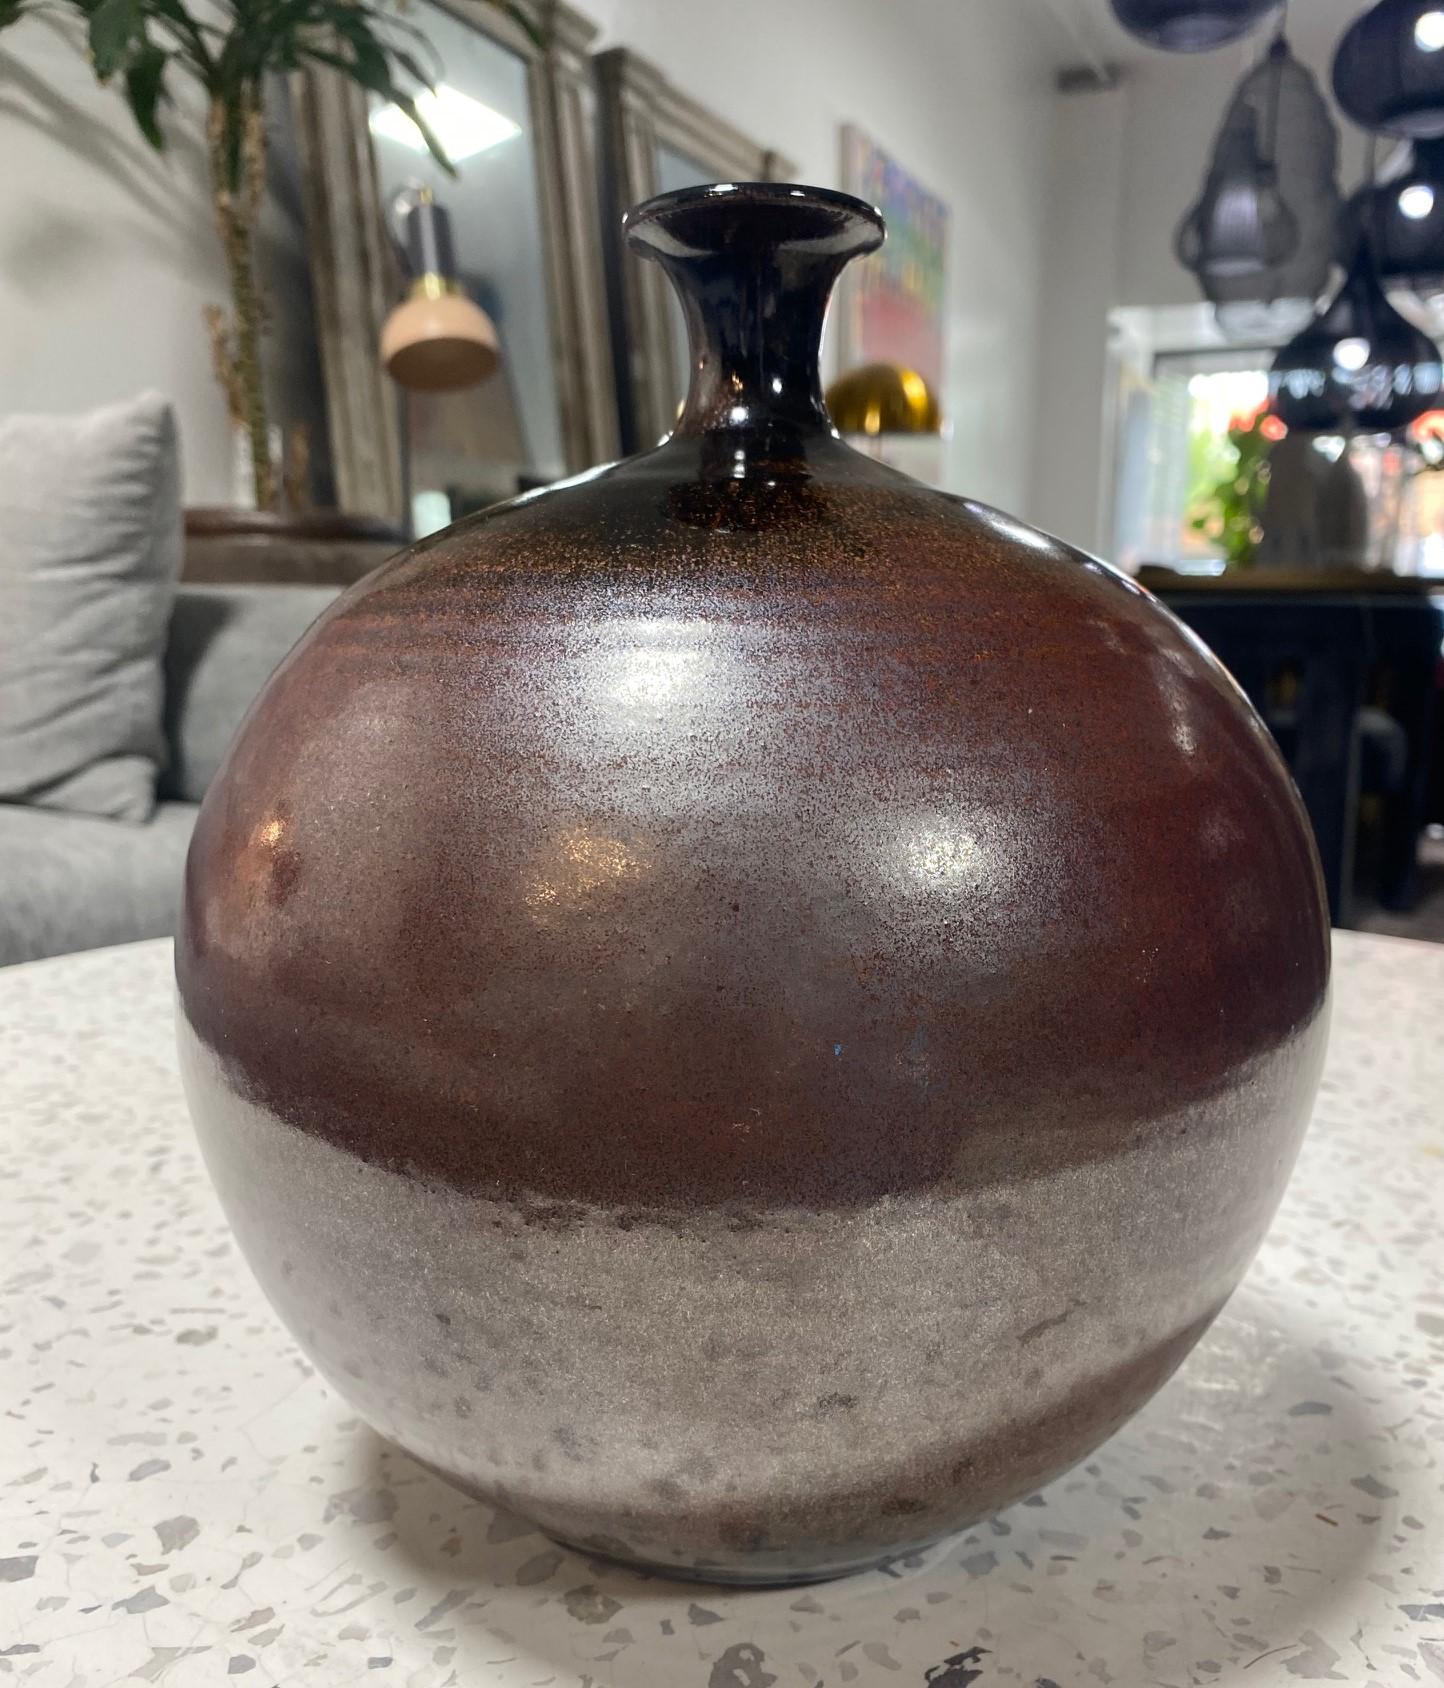 A beautifully shaped, relatively large, and sumptuously glazed Mid-Century Modern California Studio pottery vase by Spanish American master potter Antonio Prieto.  The work features a gorgeous plum-purple glaze with hints of browns and reds.  It is